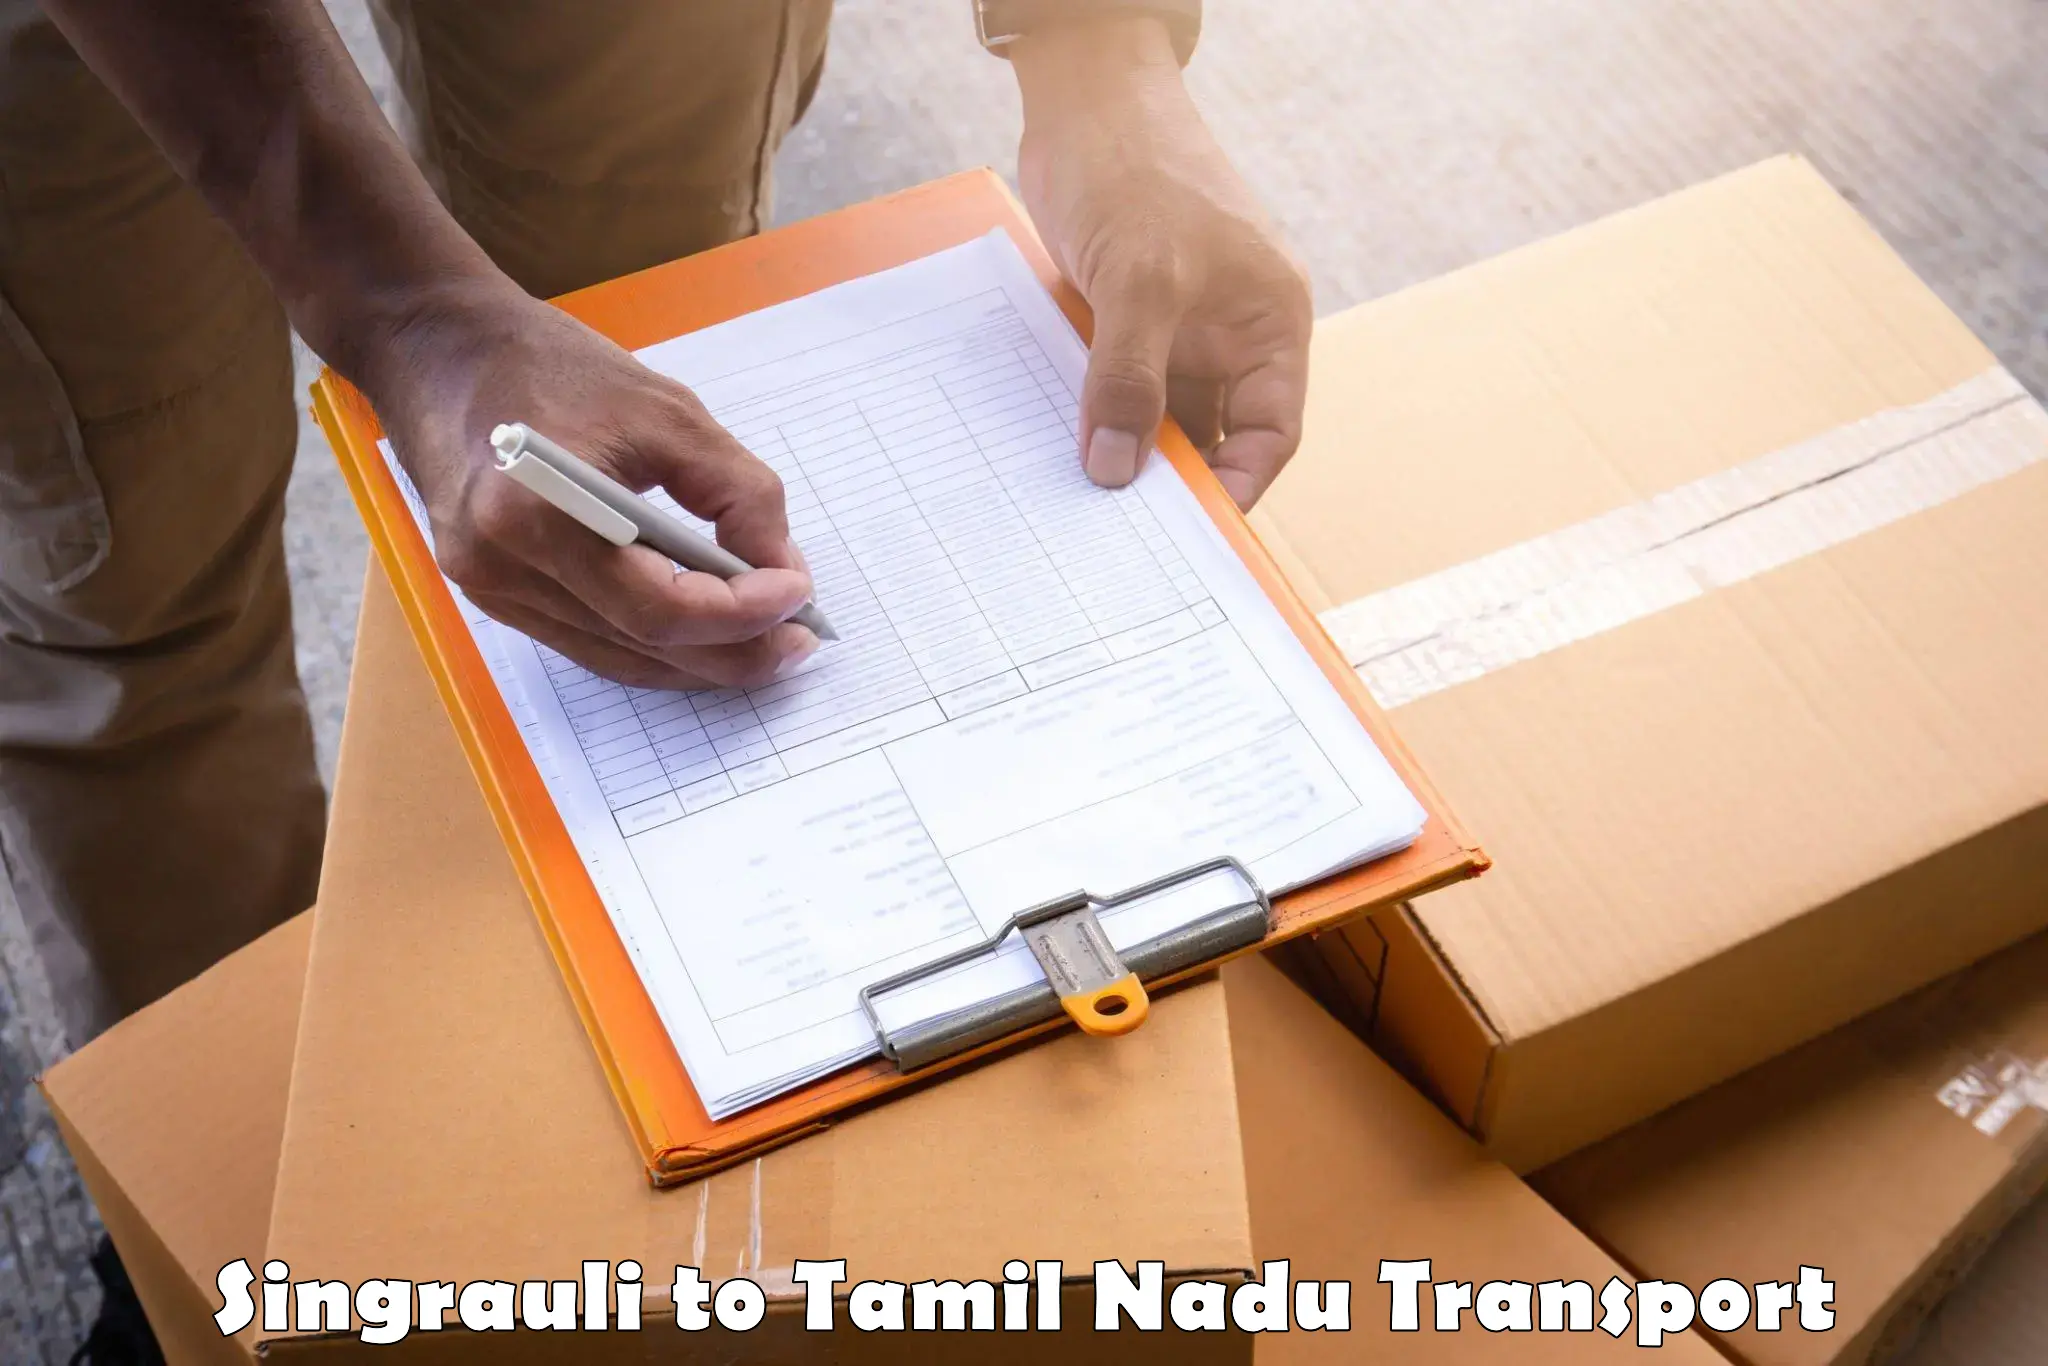 Delivery service Singrauli to Ennore Port Chennai